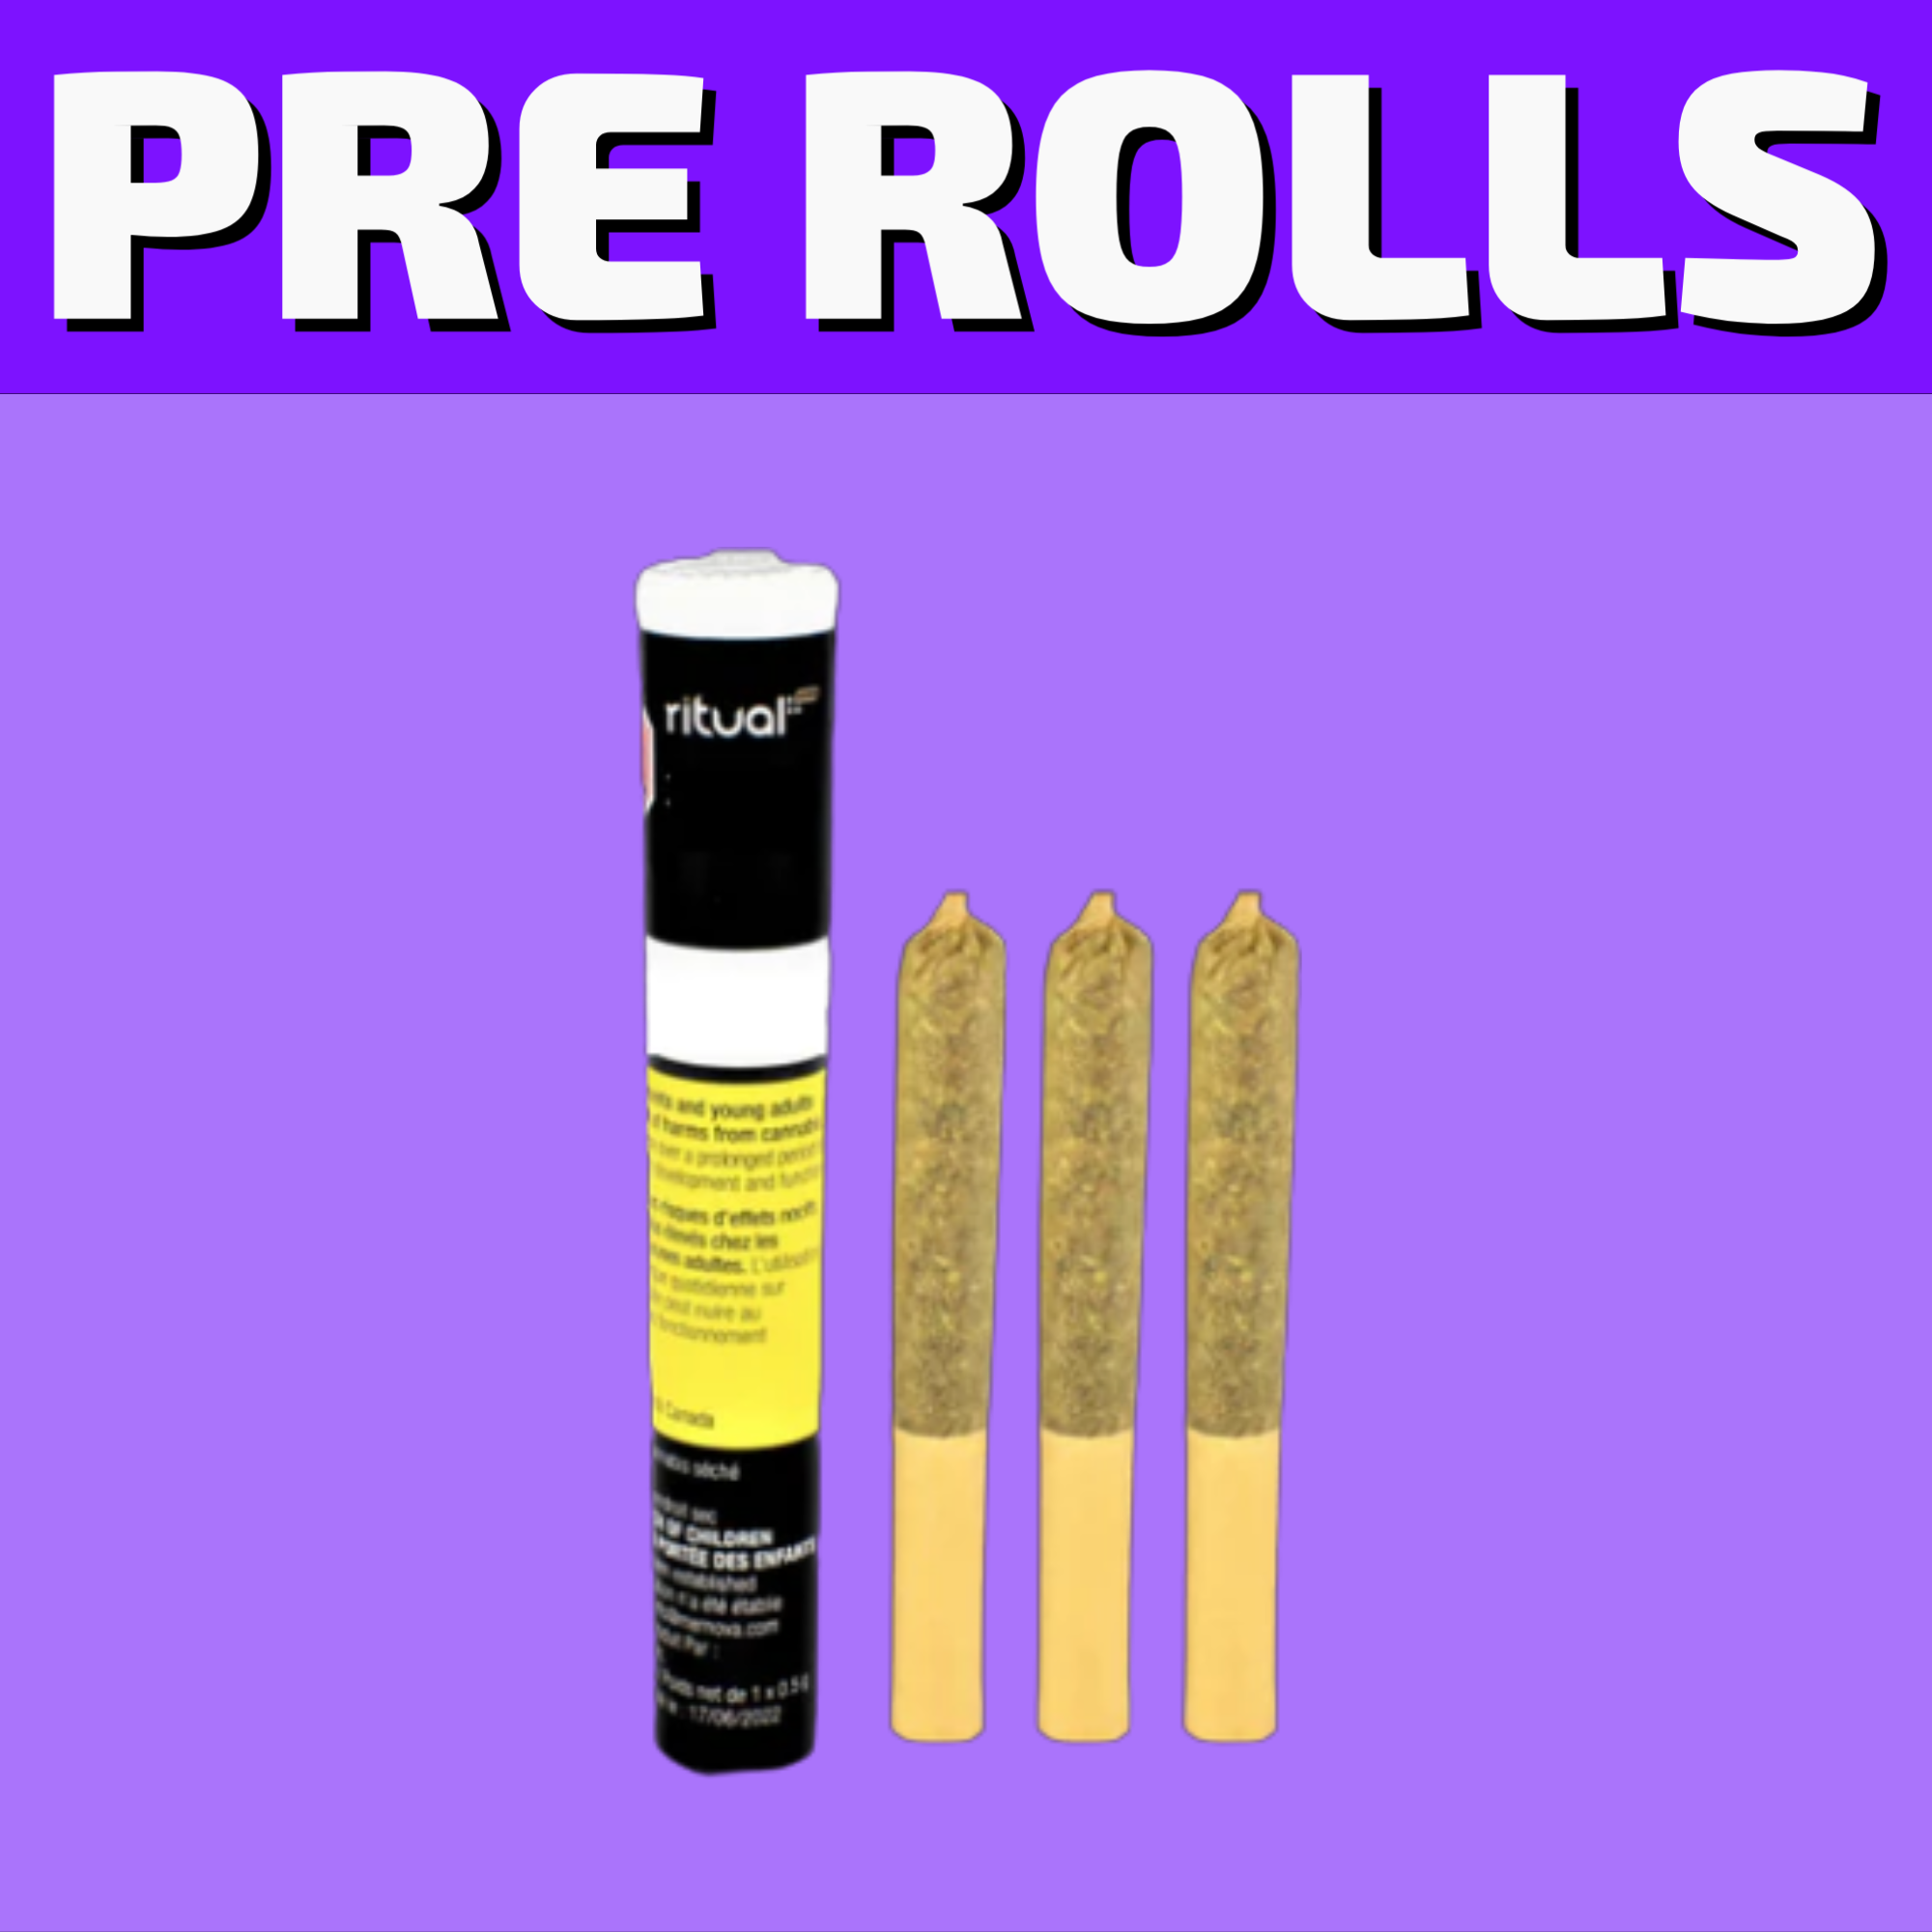 Shop Winnipeg's best selection of Pre Rolls, Cannabis, Edibles, Concentrates, and Accessories for same day delivery or buy them in-store.   